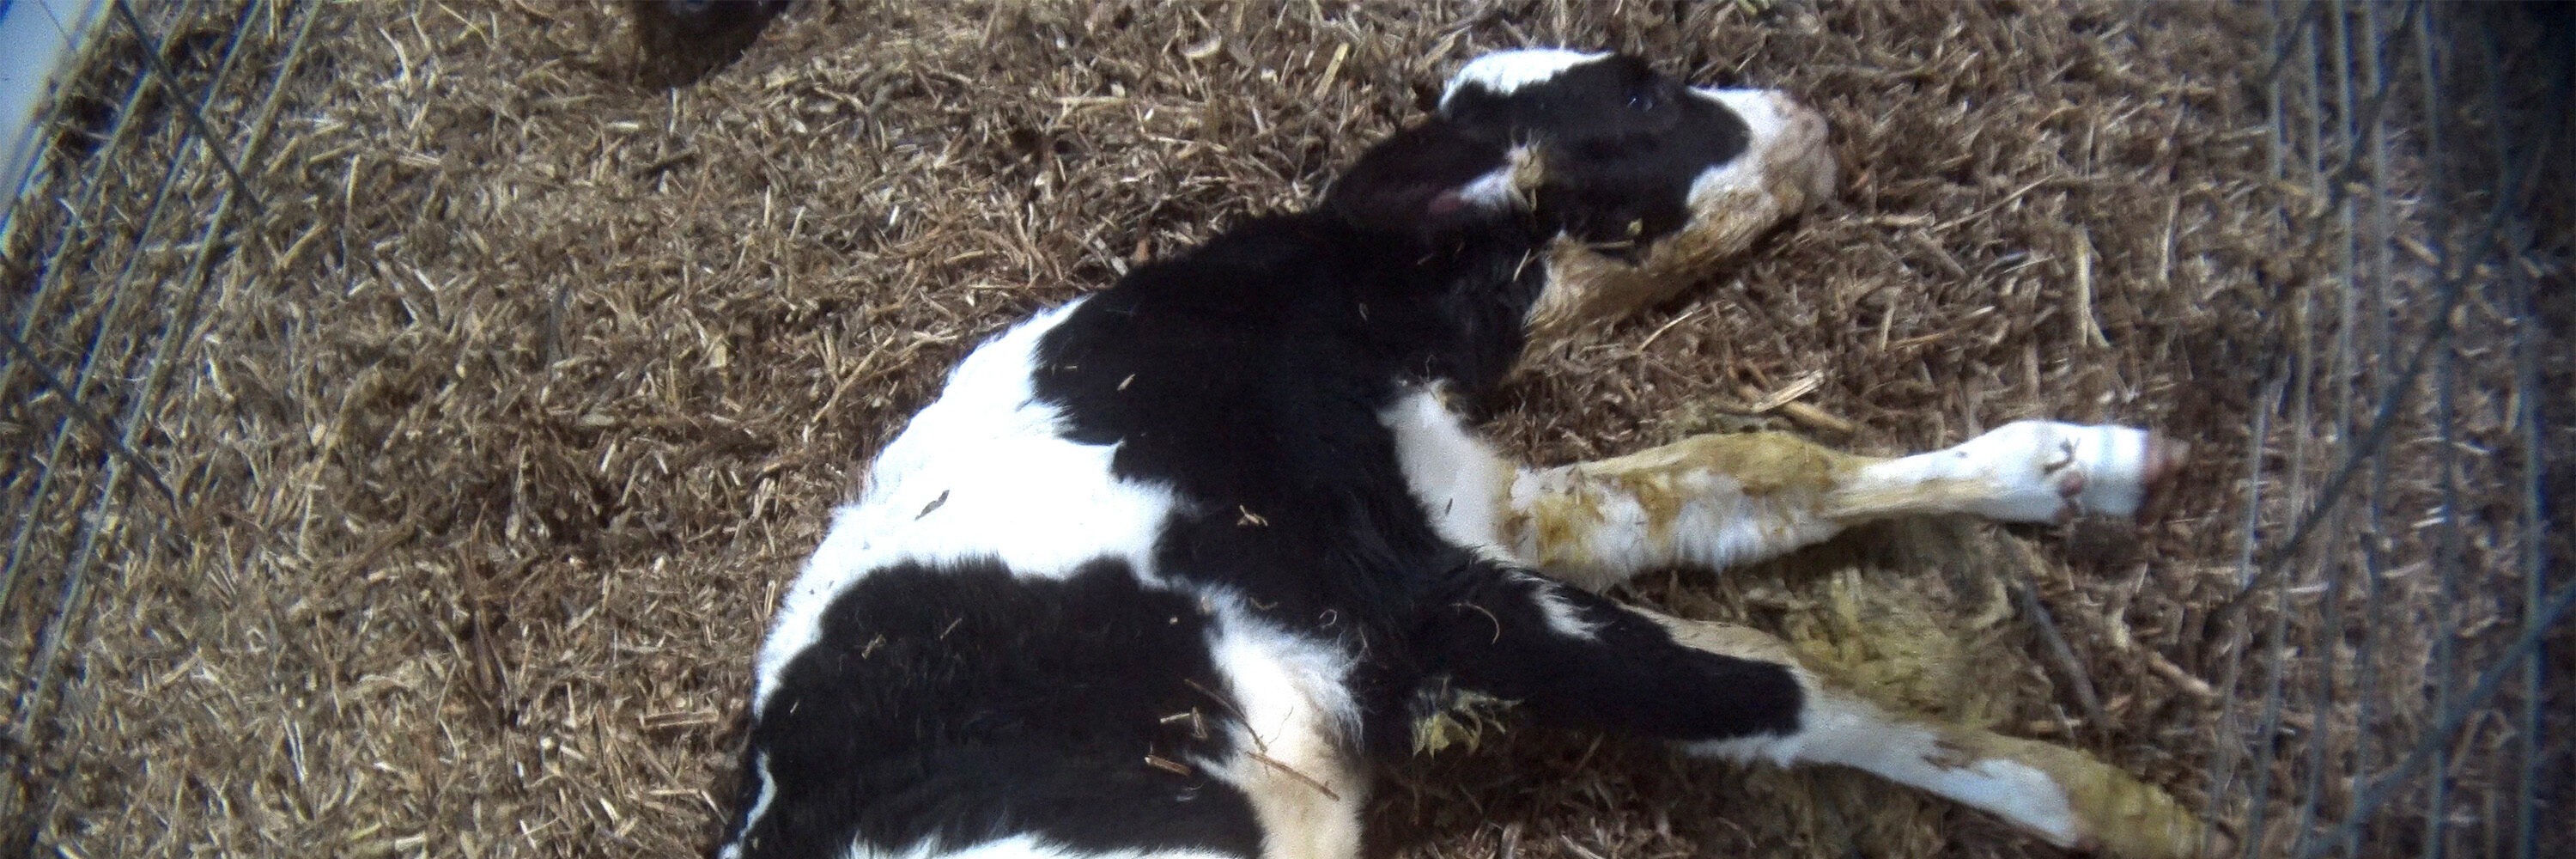 header-image-calf-died-baby-hell-3000*1000